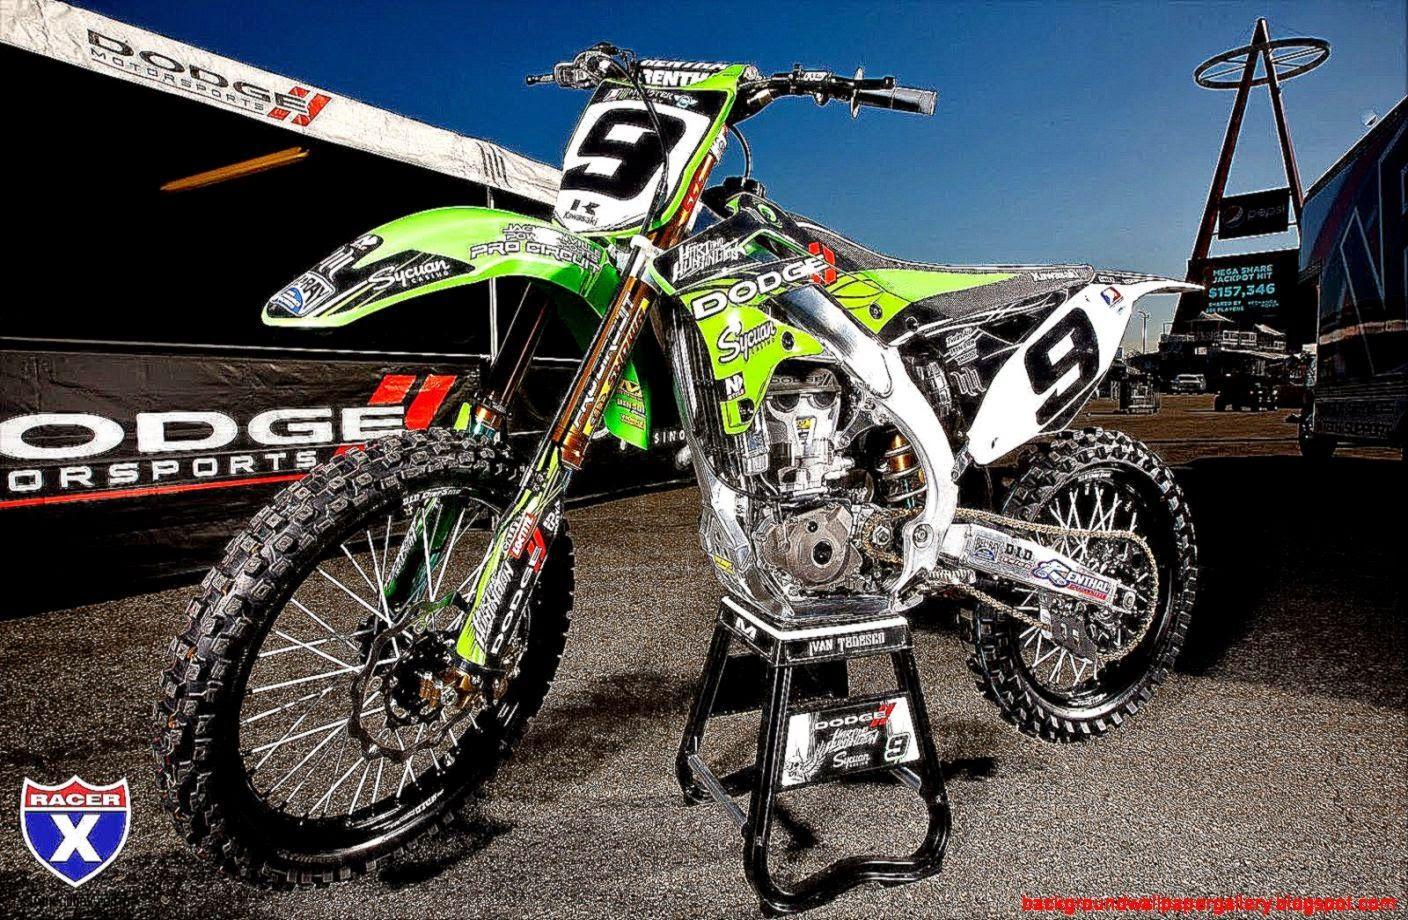 Motocross HD Wallpaper Download Free Picture. Background Wallpaper